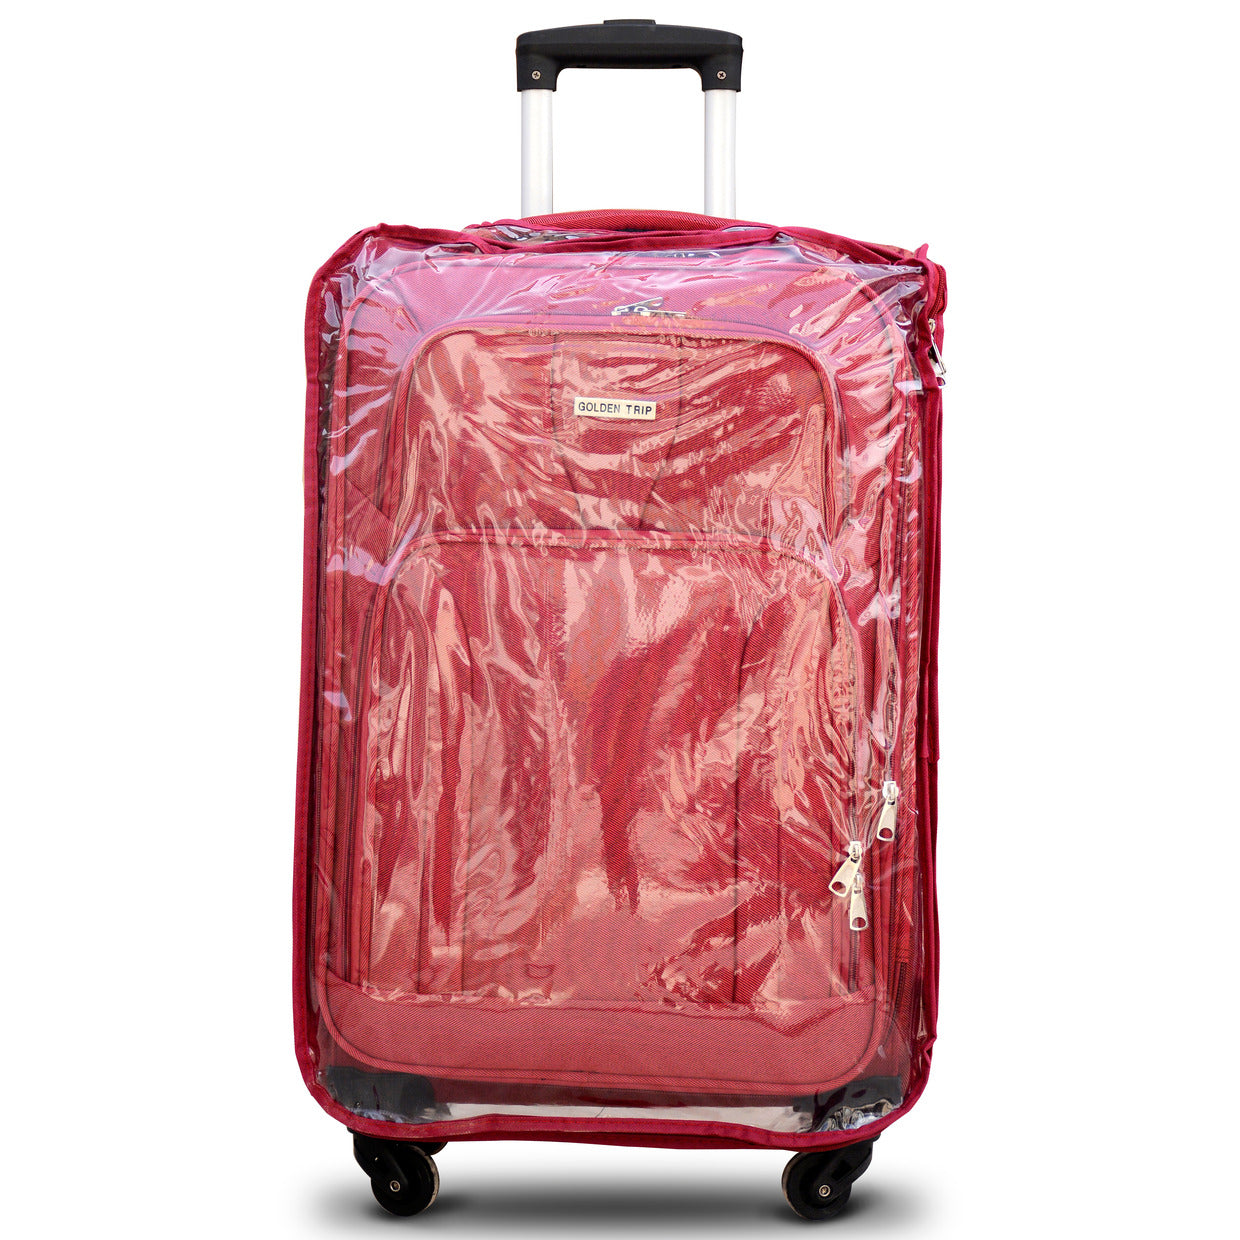 Soft Material Premium Luggage Red Color with Full Cover